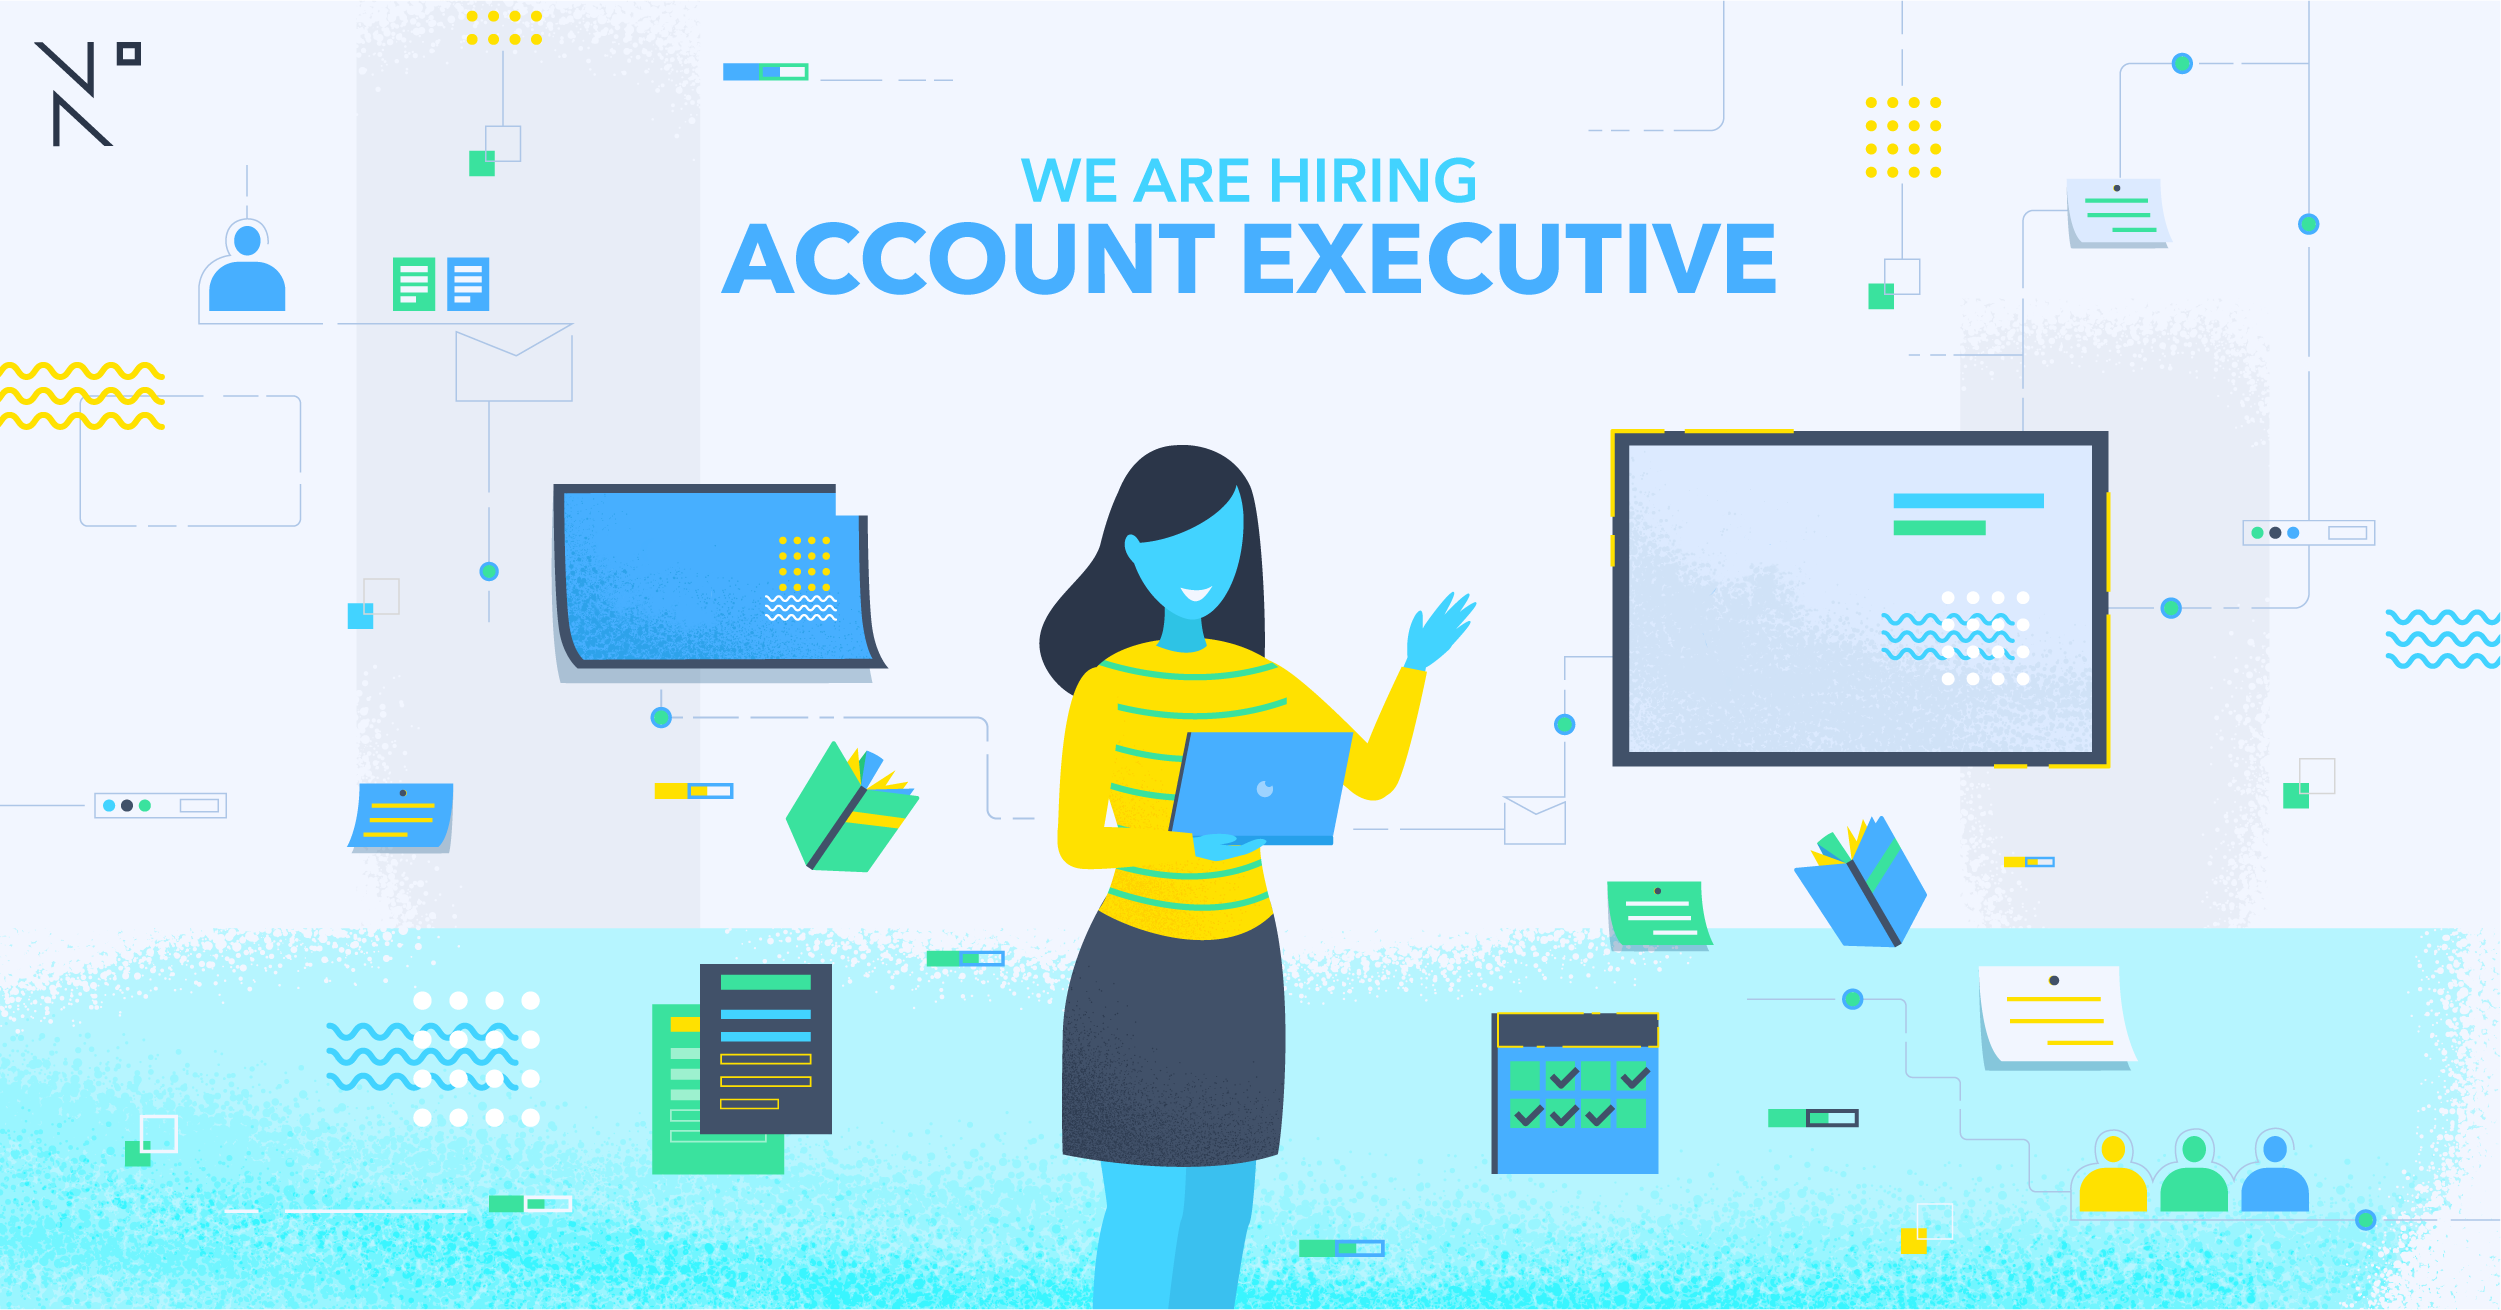 HCM] Next Good Things Agency Tuyển Dụng Account Executive Full-time 2019 - YBOX